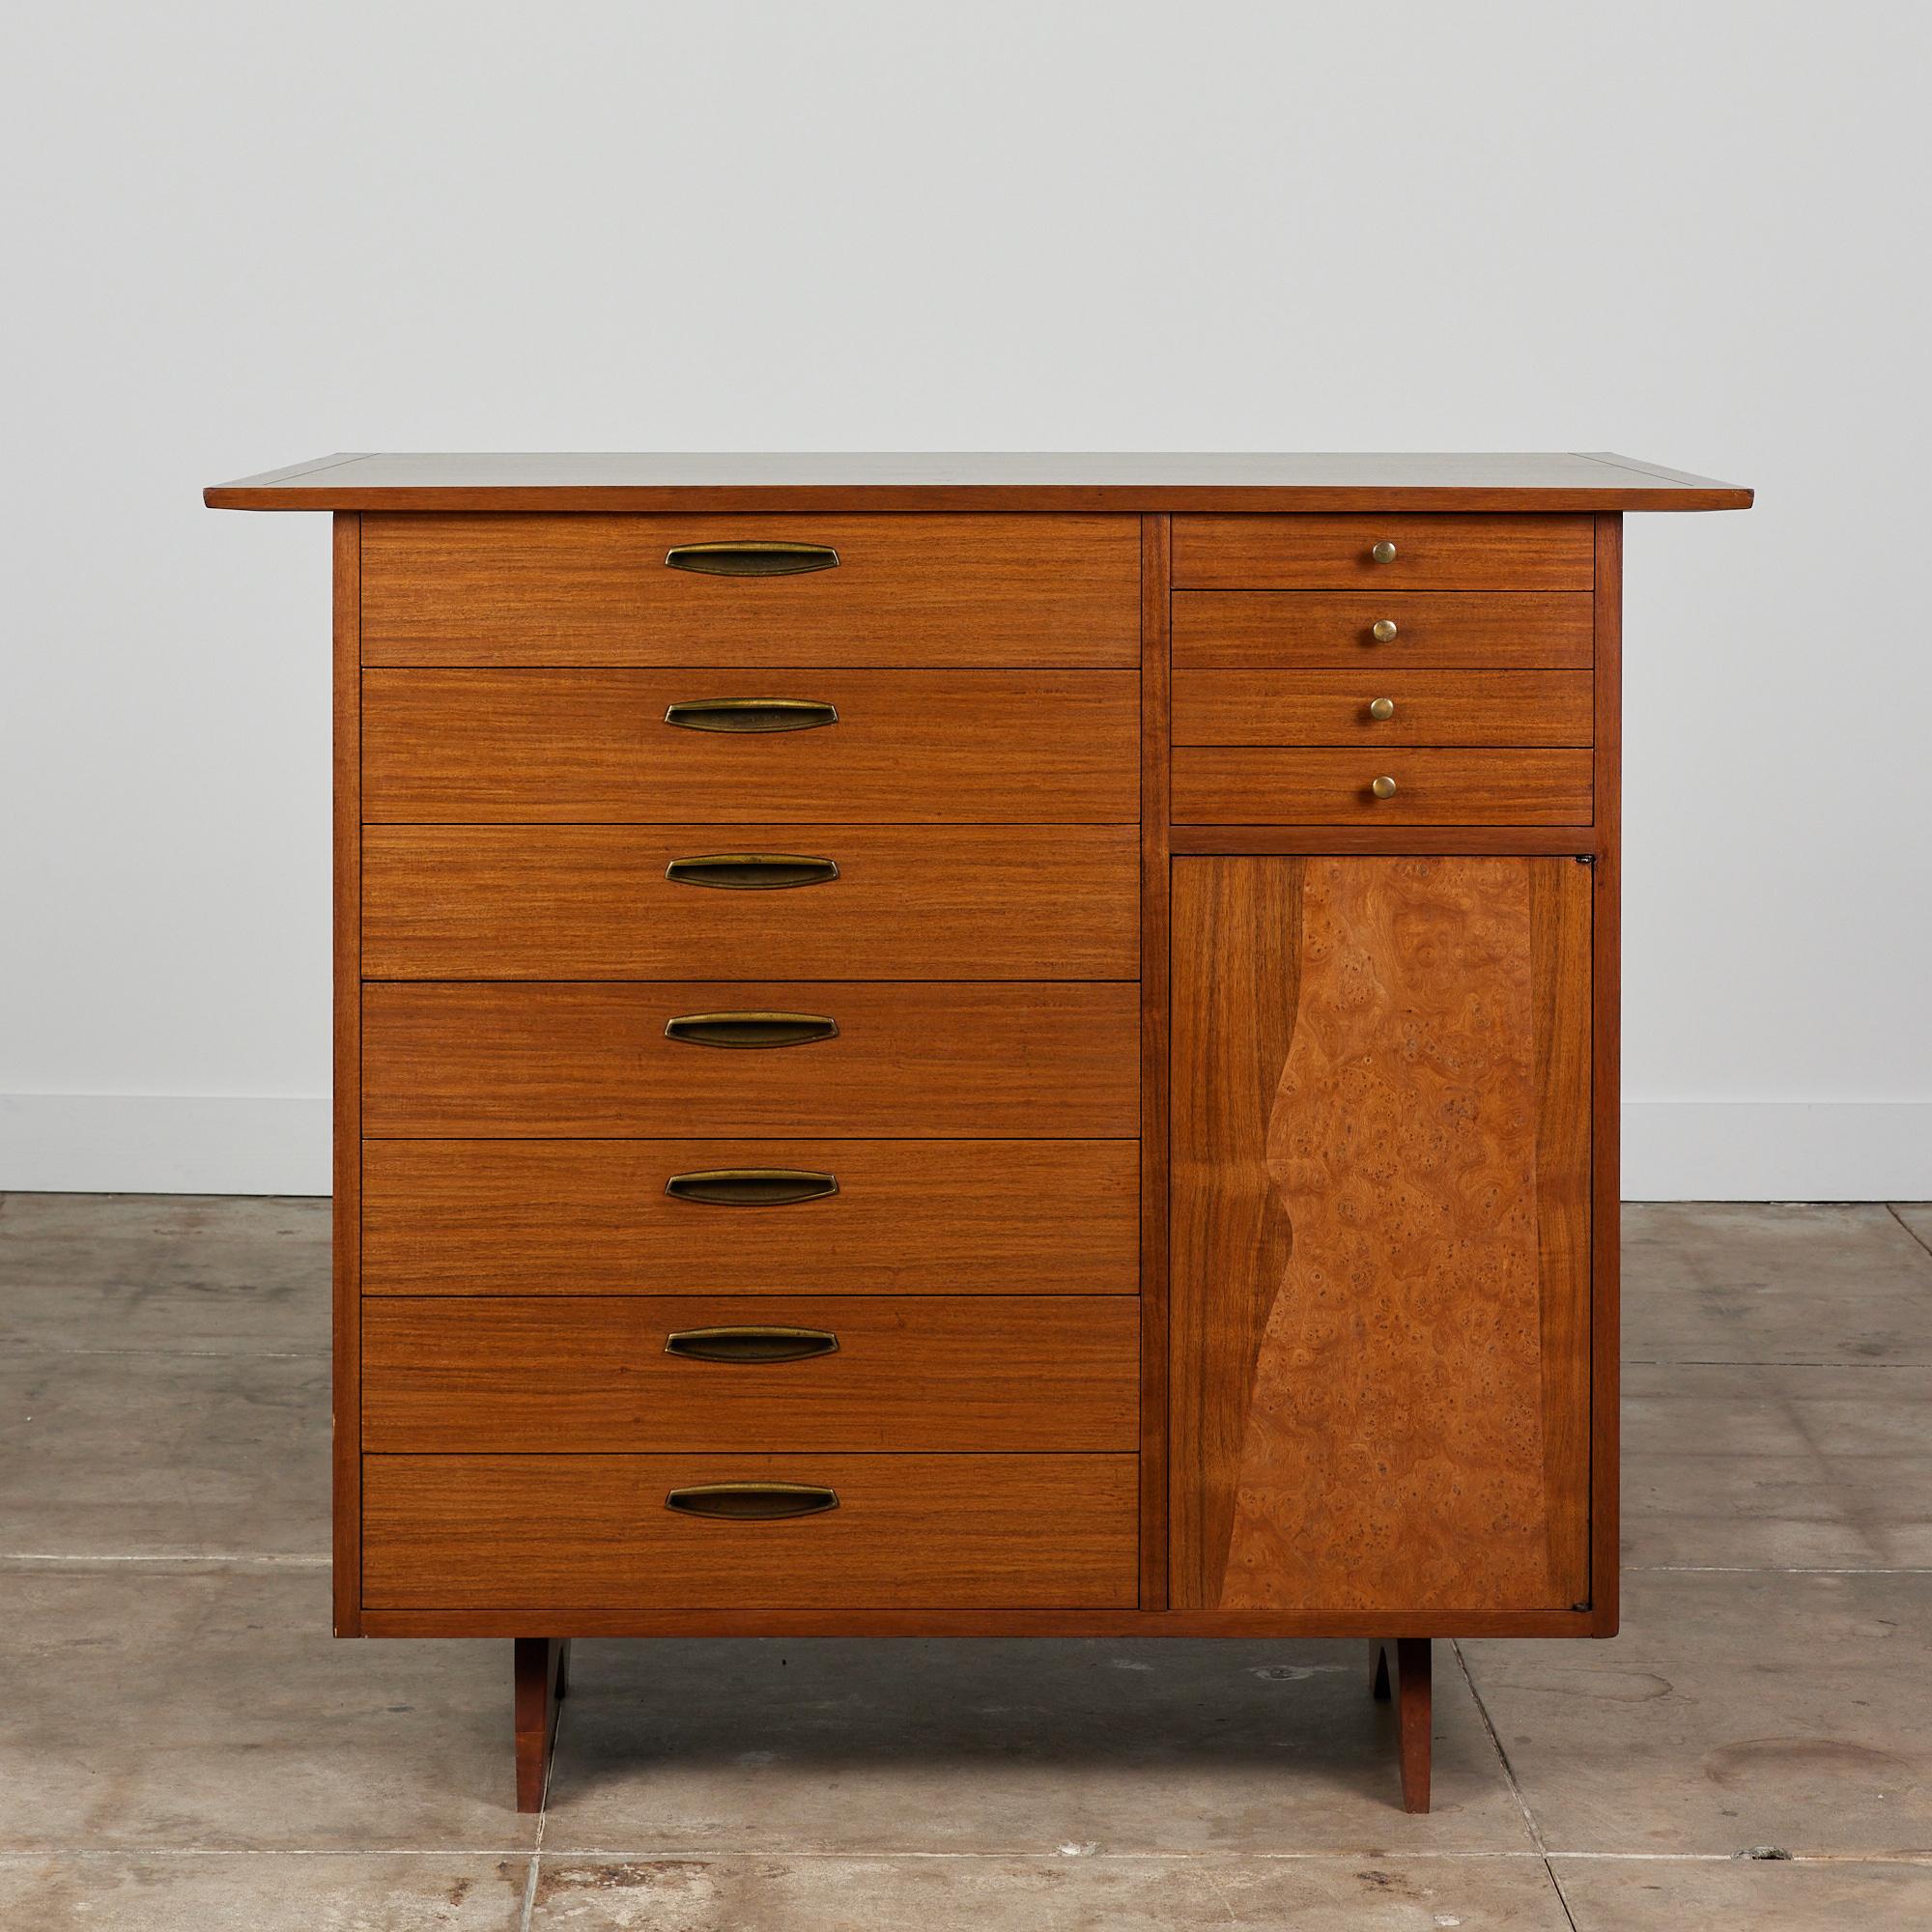 Walnut dresser by George Nakashima for Grand Rapids, Michigan-based company Widdicomb, c.1960s for their 